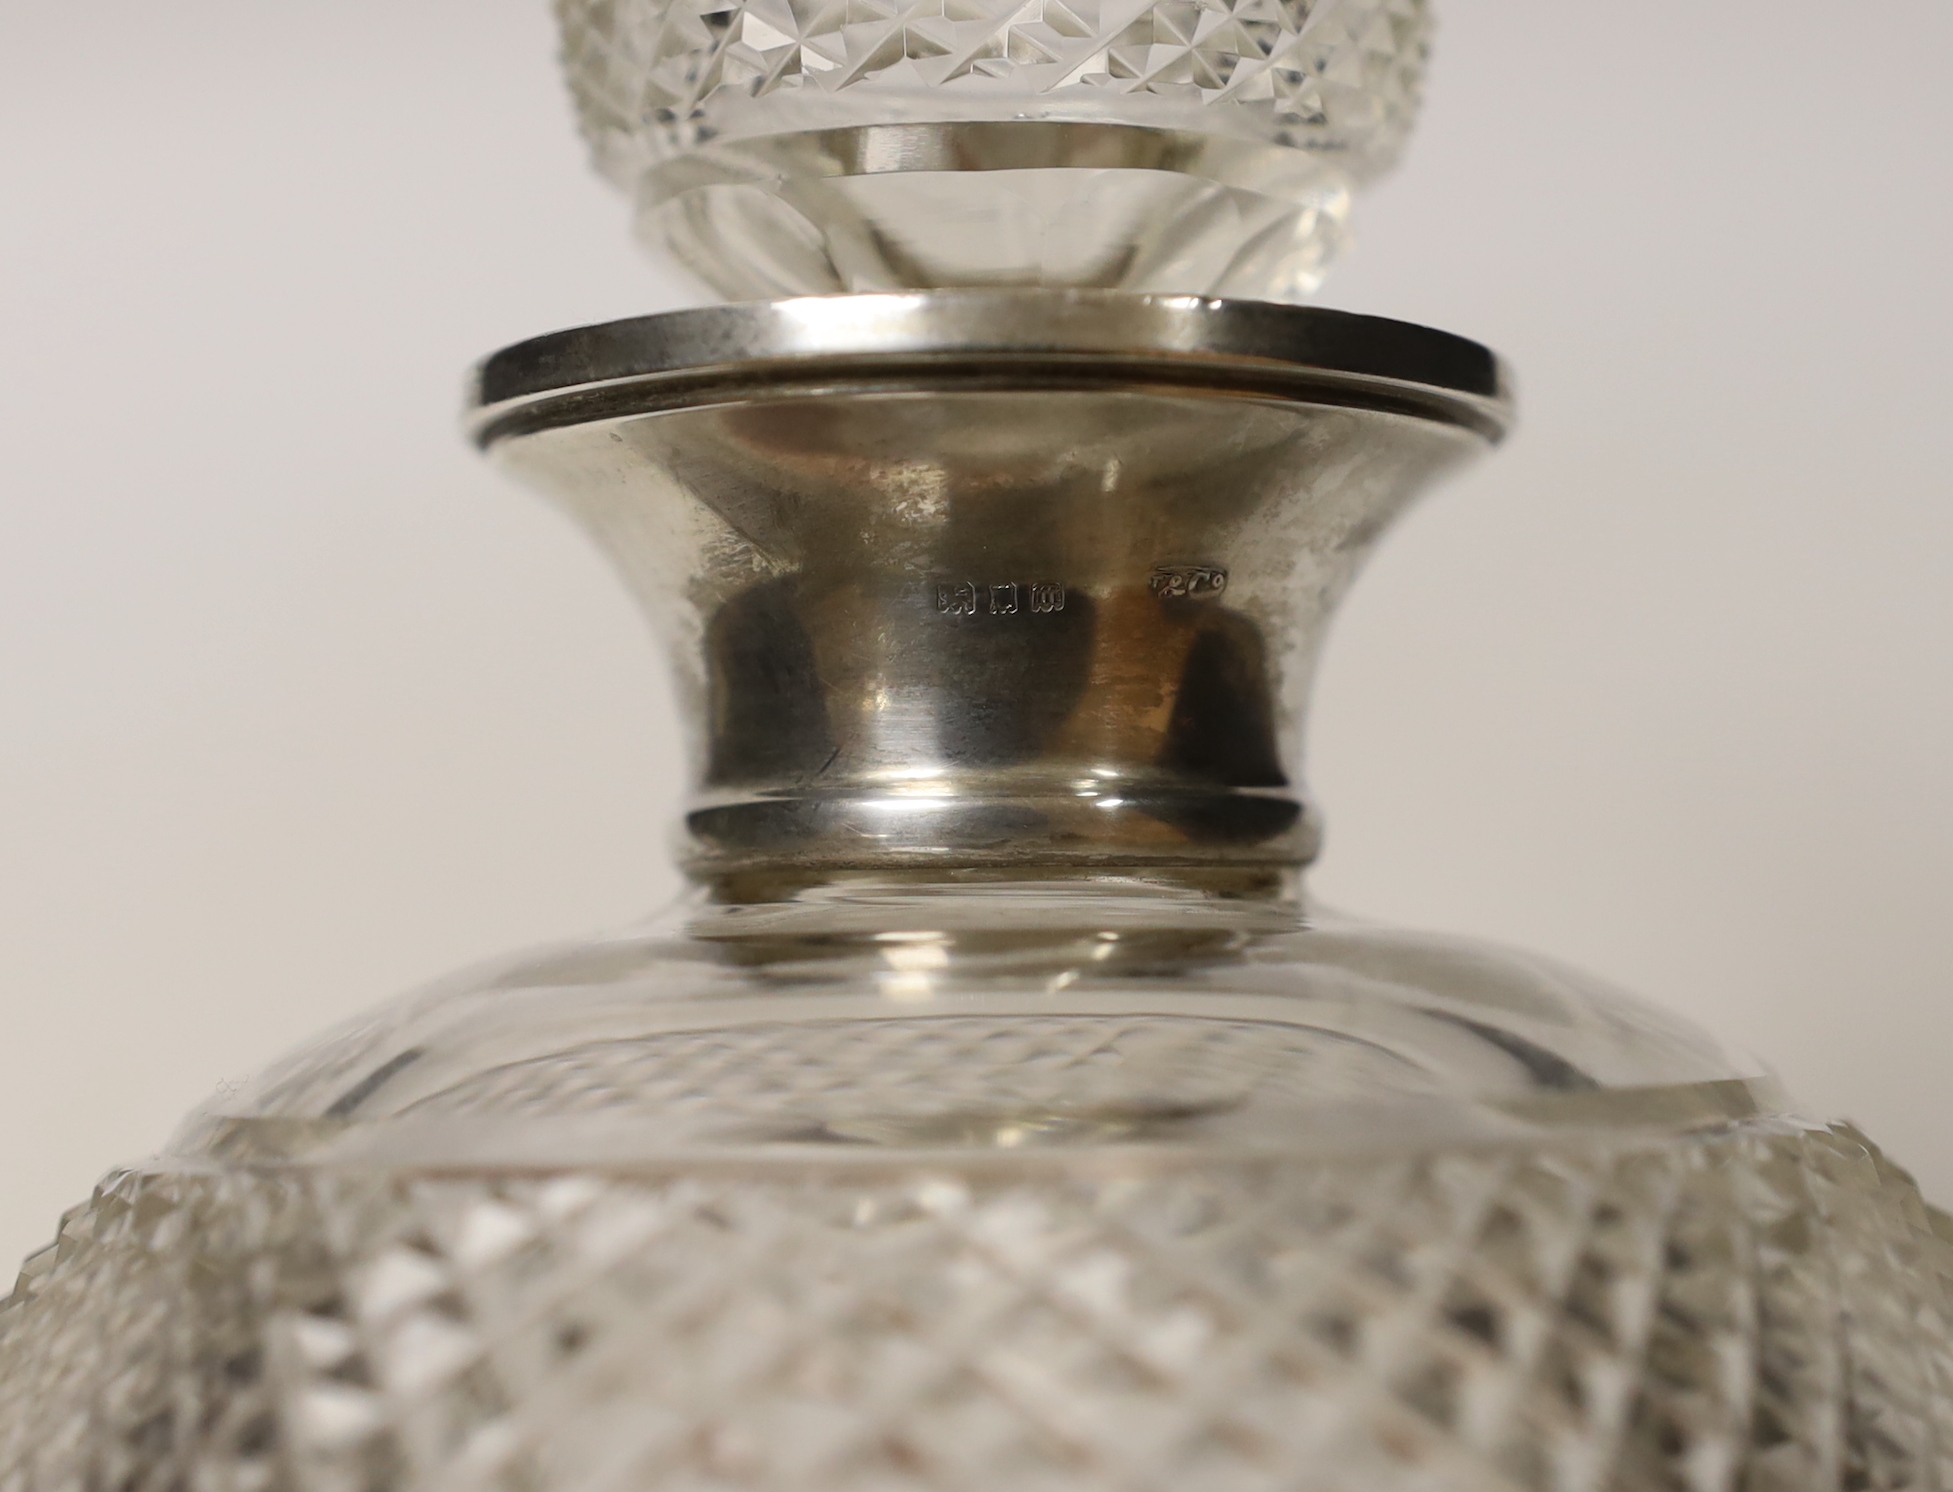 A George V silver mounted cut glass thistle shaped decanter and stopper, Wolfsky & Co Ltd, London, 1927, 29.5cm.